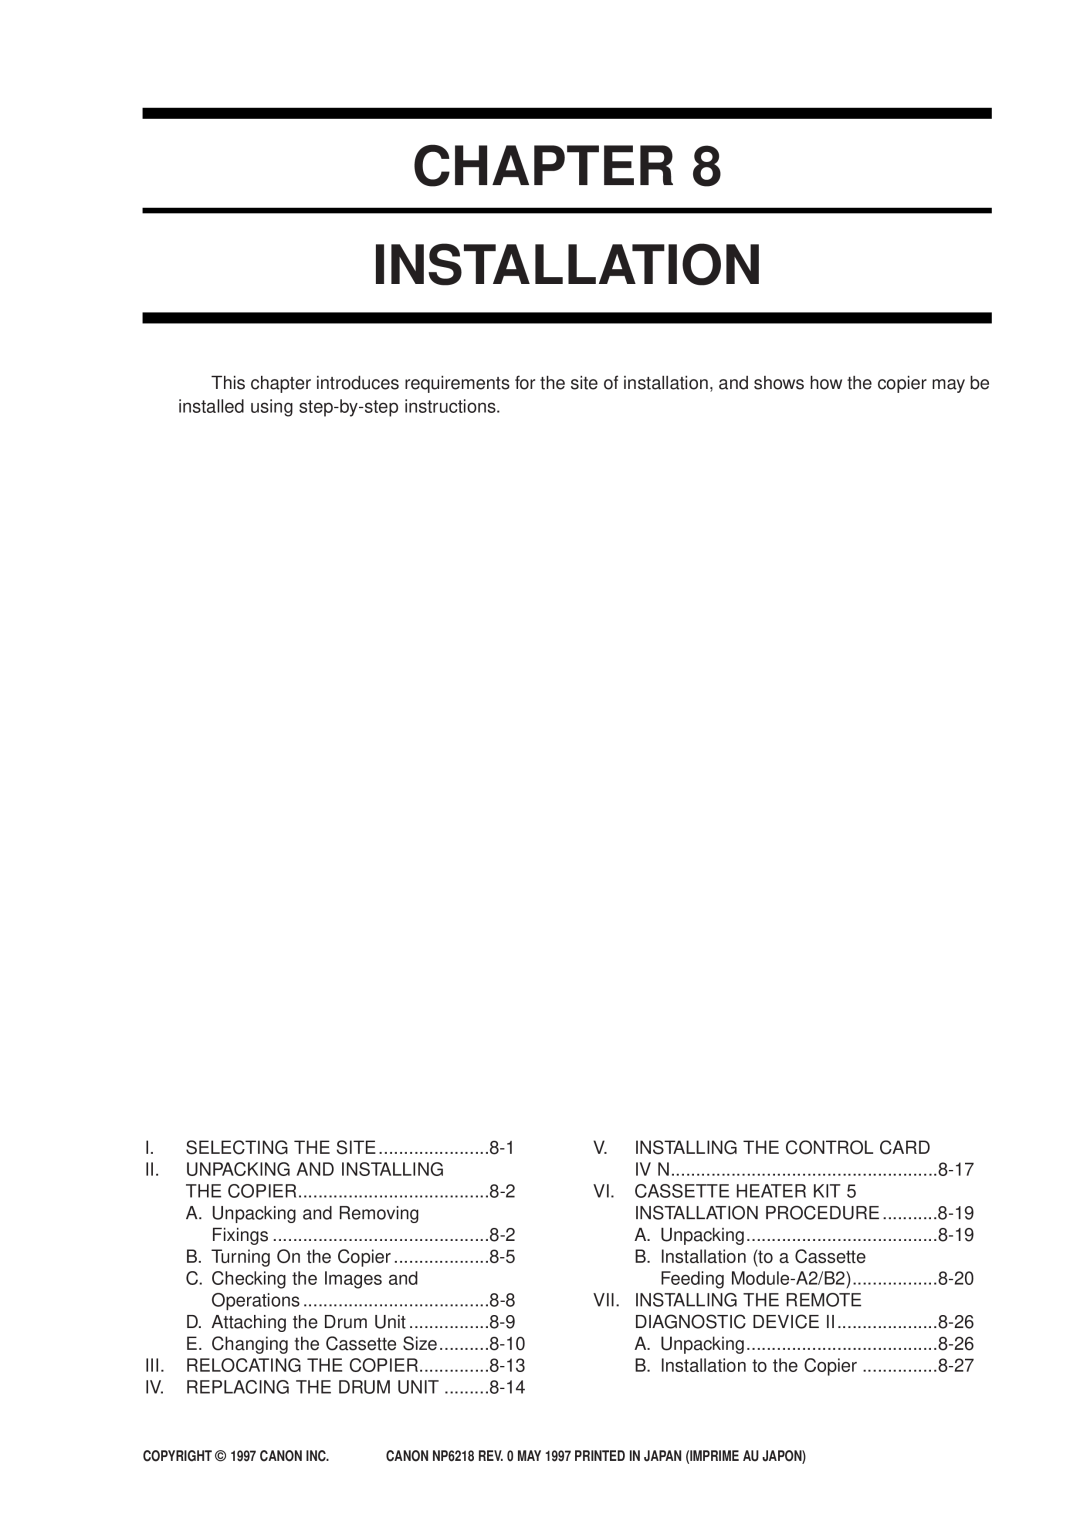 Canon NP6218, FY8-13EX-000 service manual Chapter Installation 